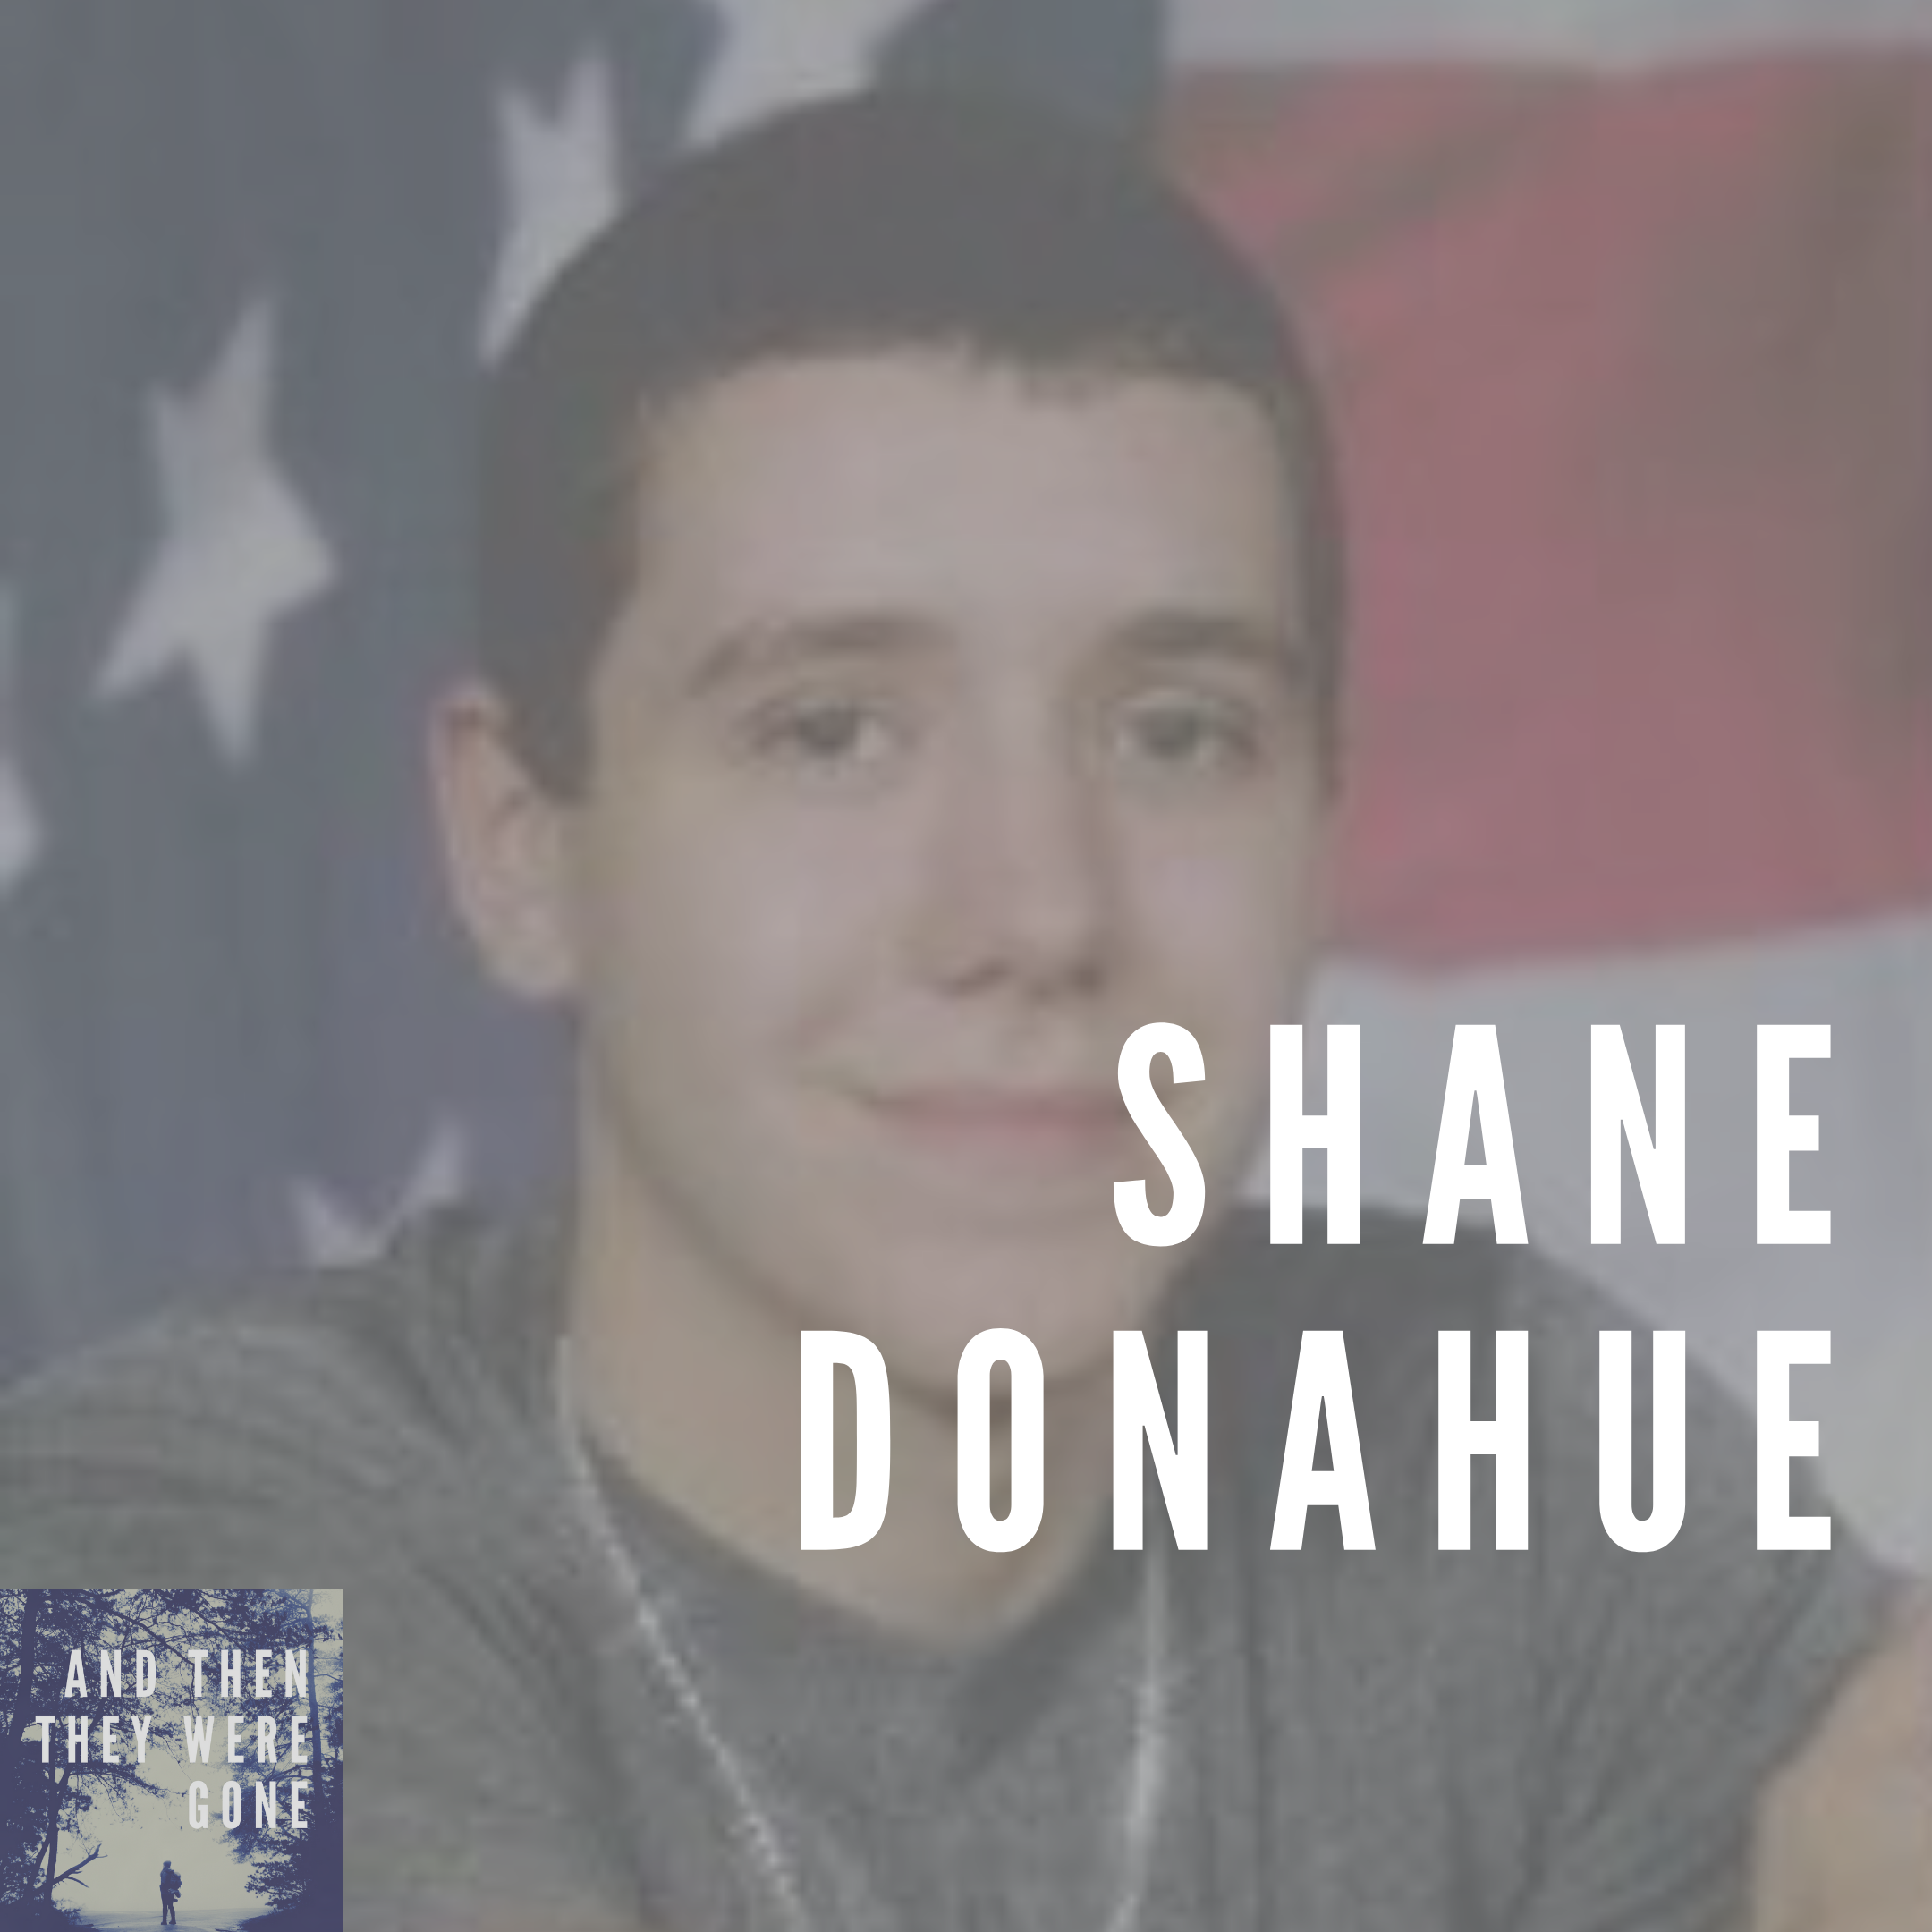 Shane Donahue - Missing since March 22, 2010